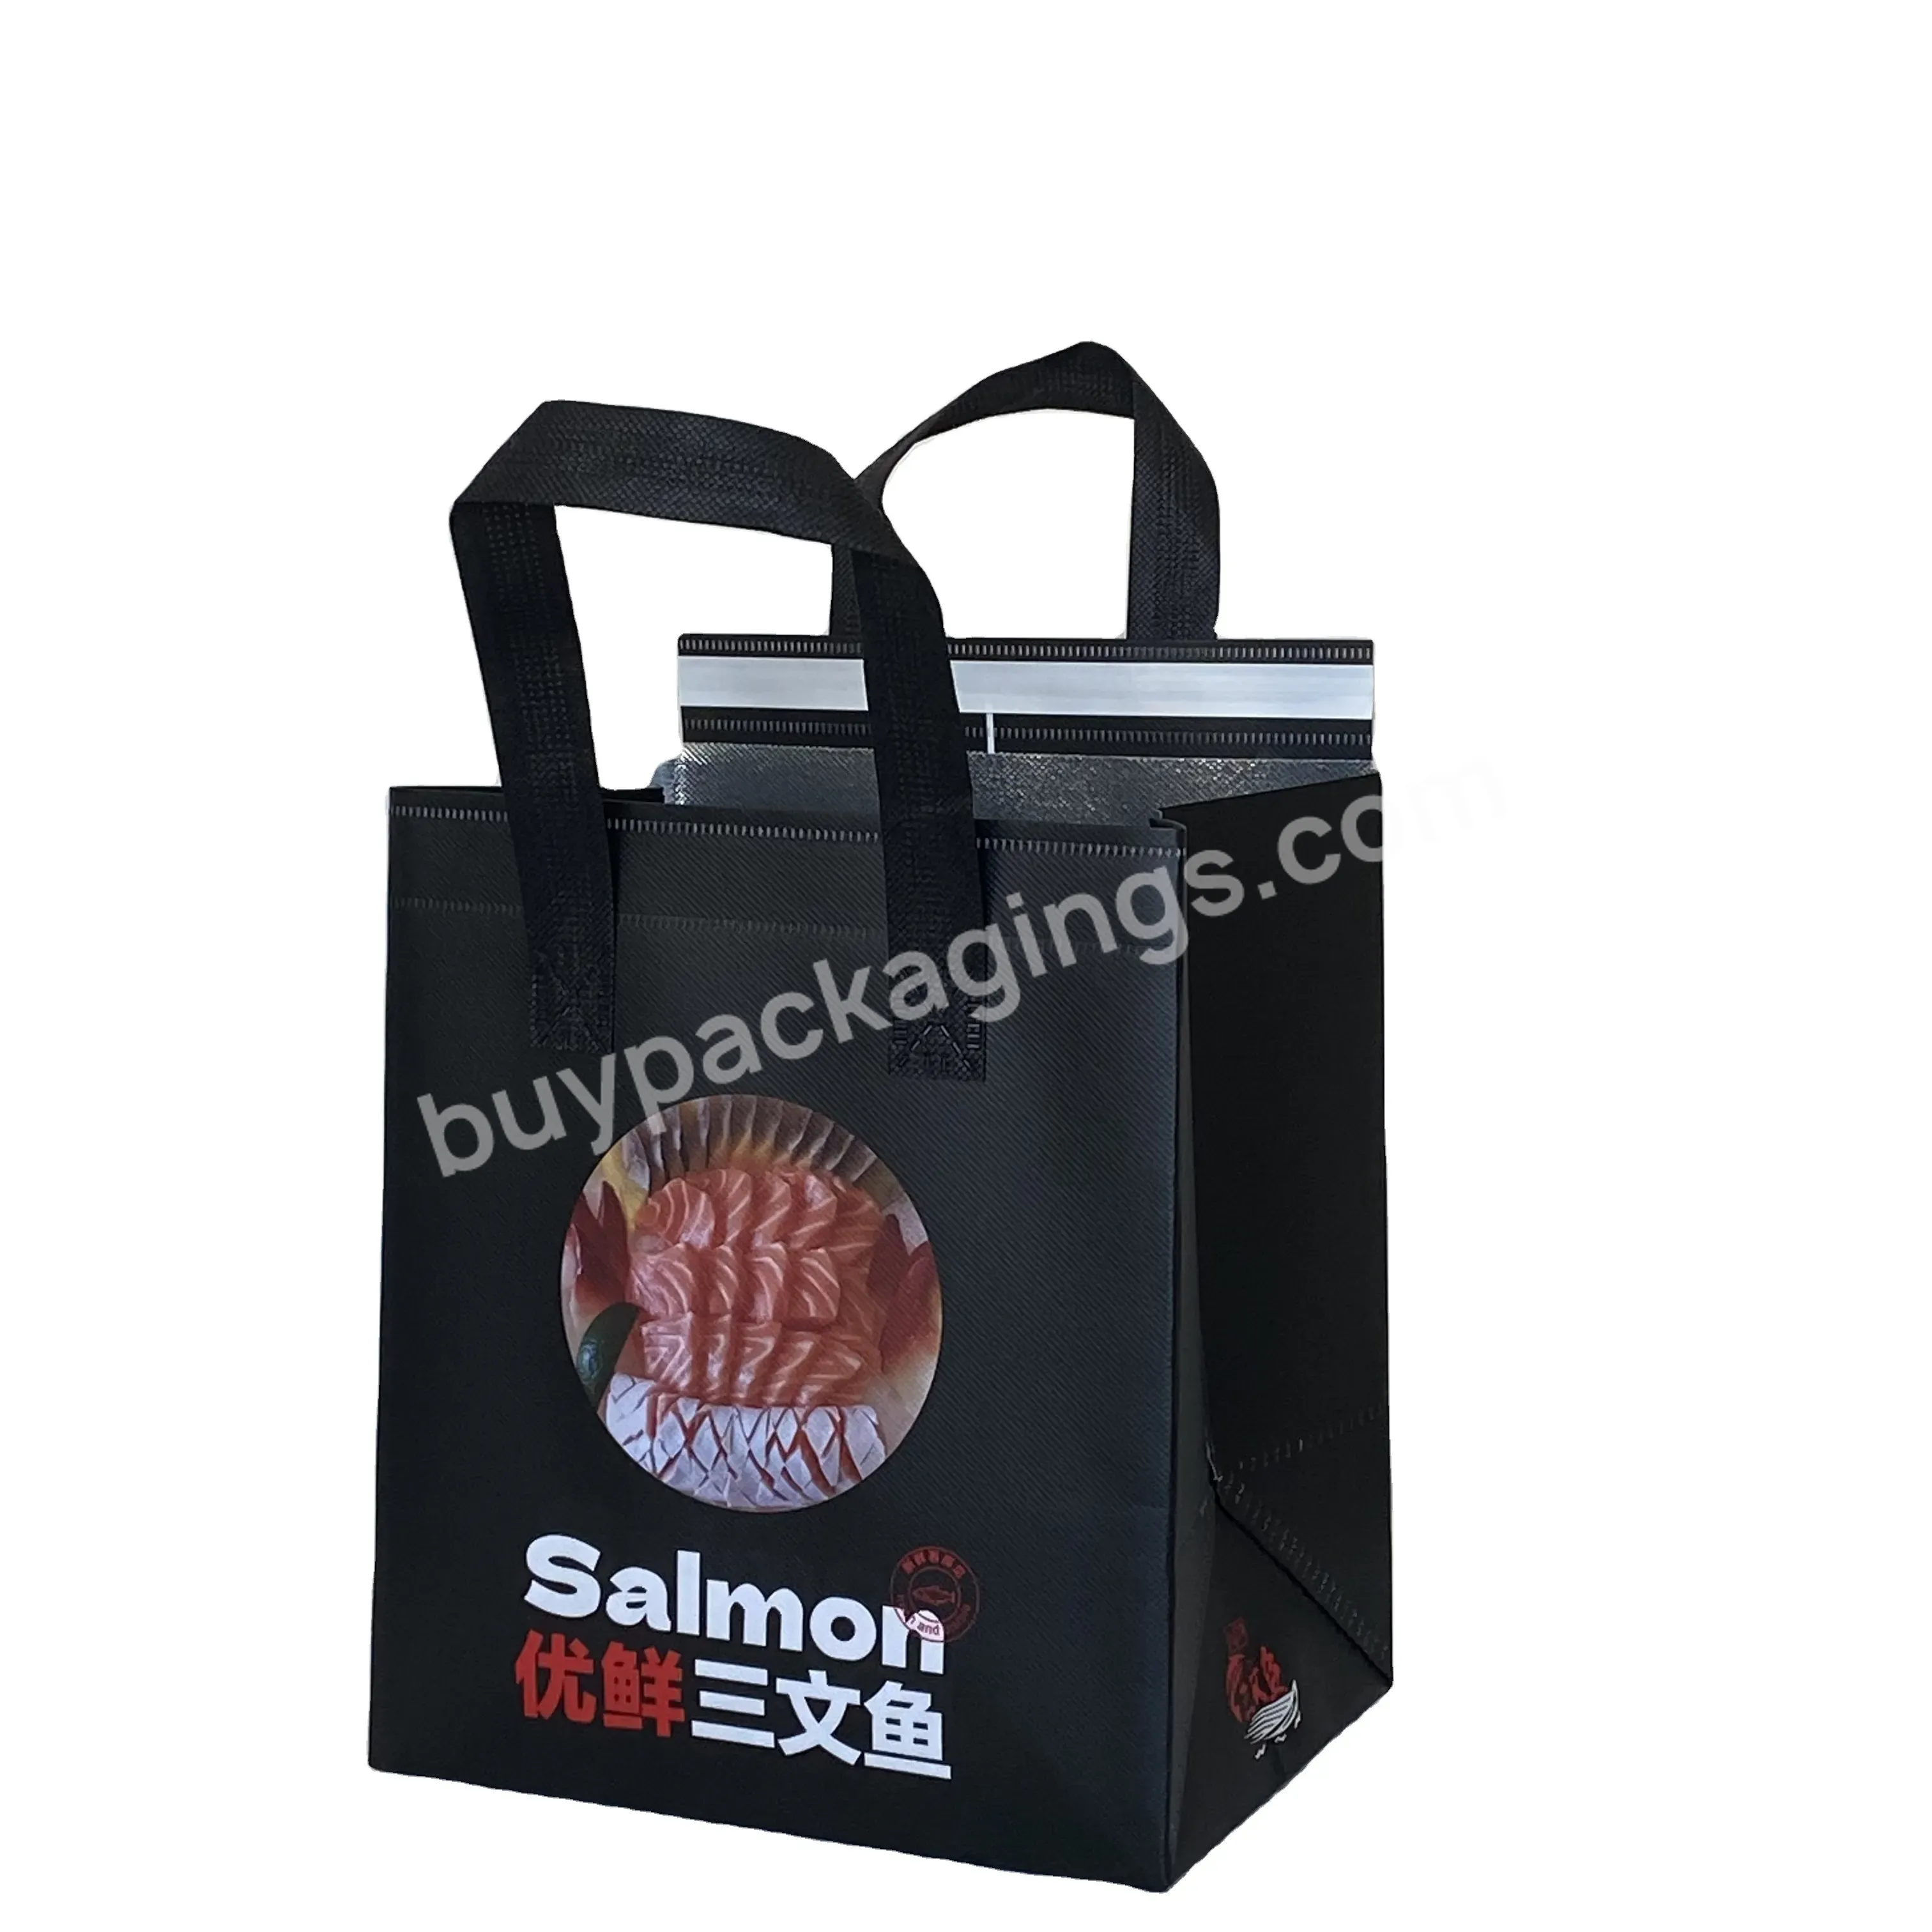 China Factory Eco Friendly Wholesale And Durable Foldable Waterproof Large Capacity Non Woven Food Bag With Handle - Buy Non Woven Food Shopping Bag With Handle,Non Woven Bag With Handle,Foldable Waterproof Non Woven Bag.